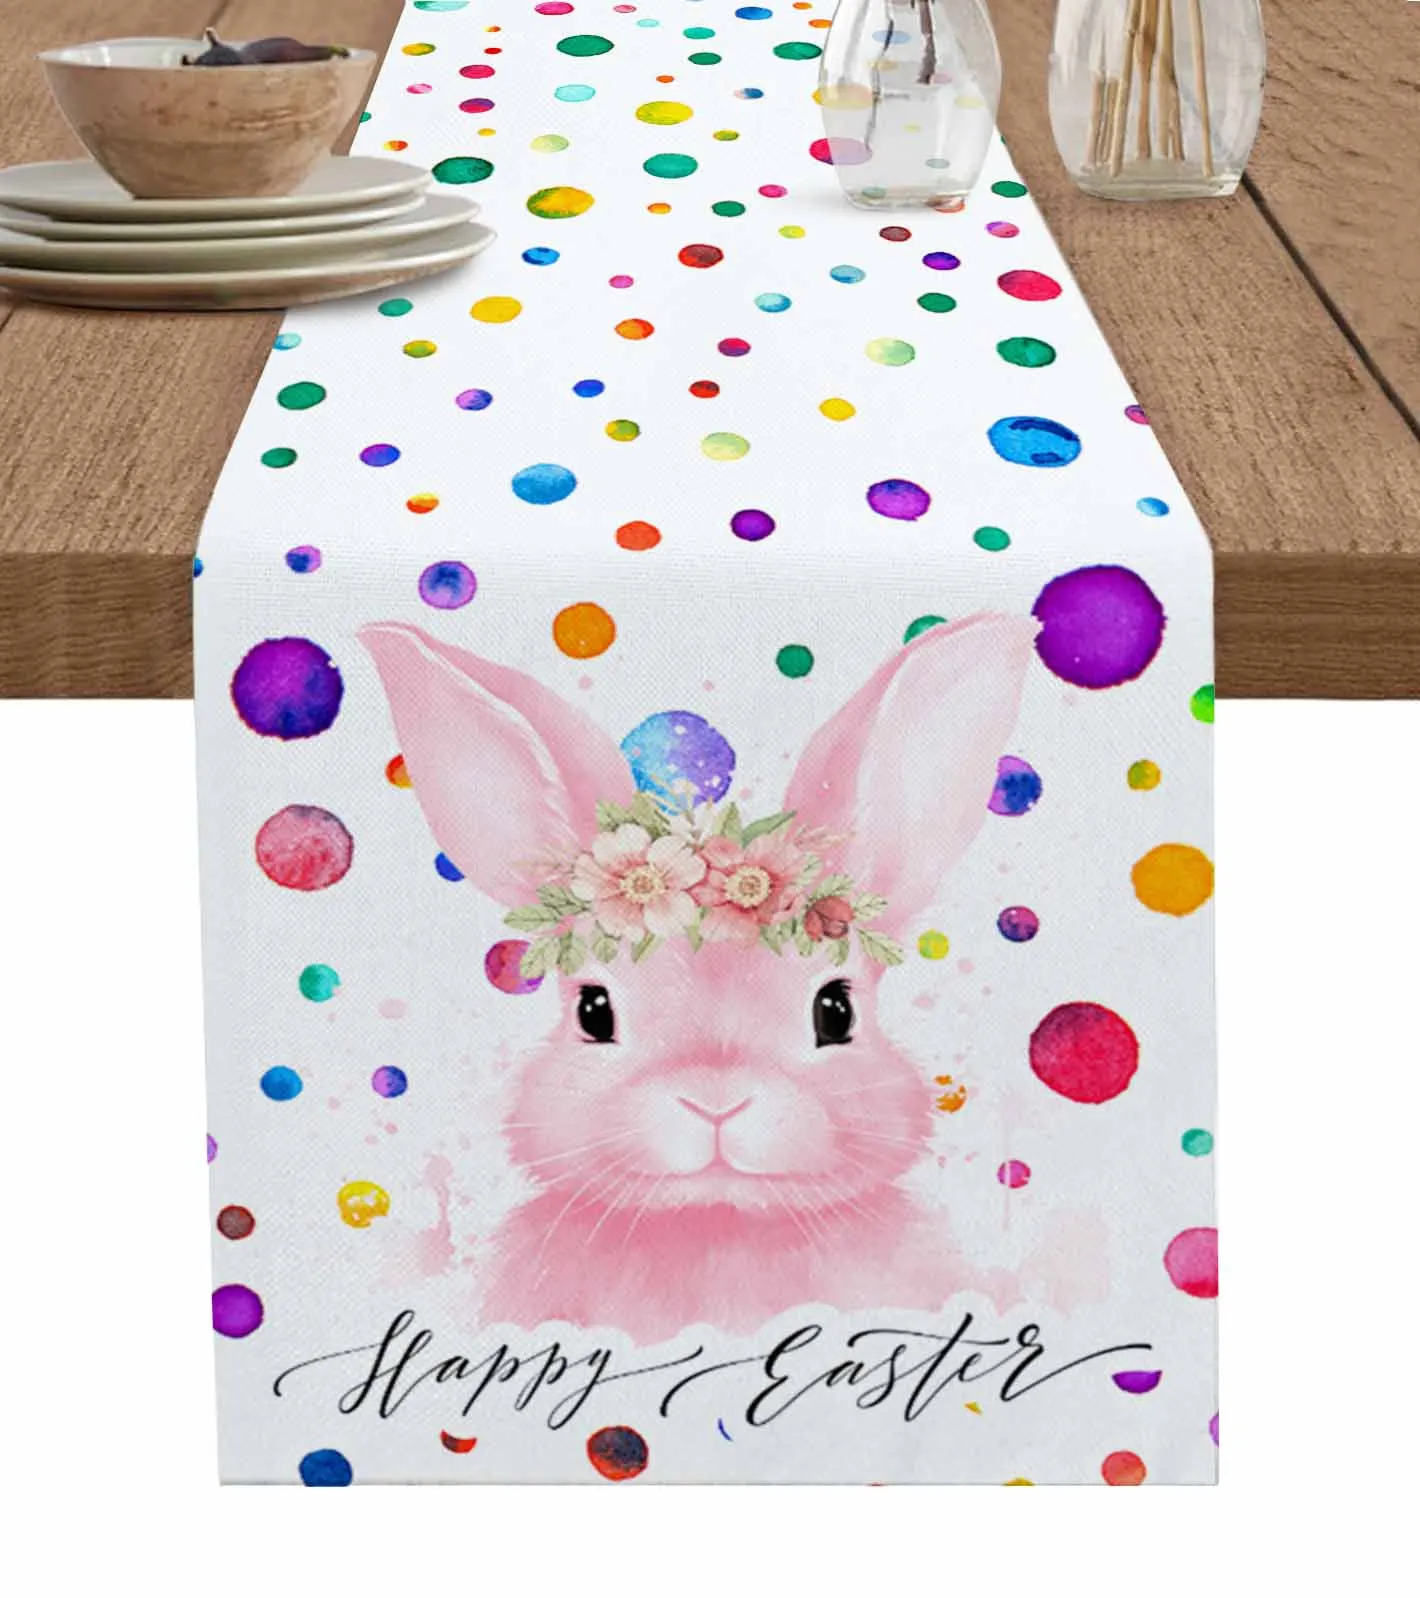 

Easter Pink Bunny Colorful Polka Dots Table Runner Luxury Wedding Decor Table Runner Home Dining Holiday Decor Tablecloth